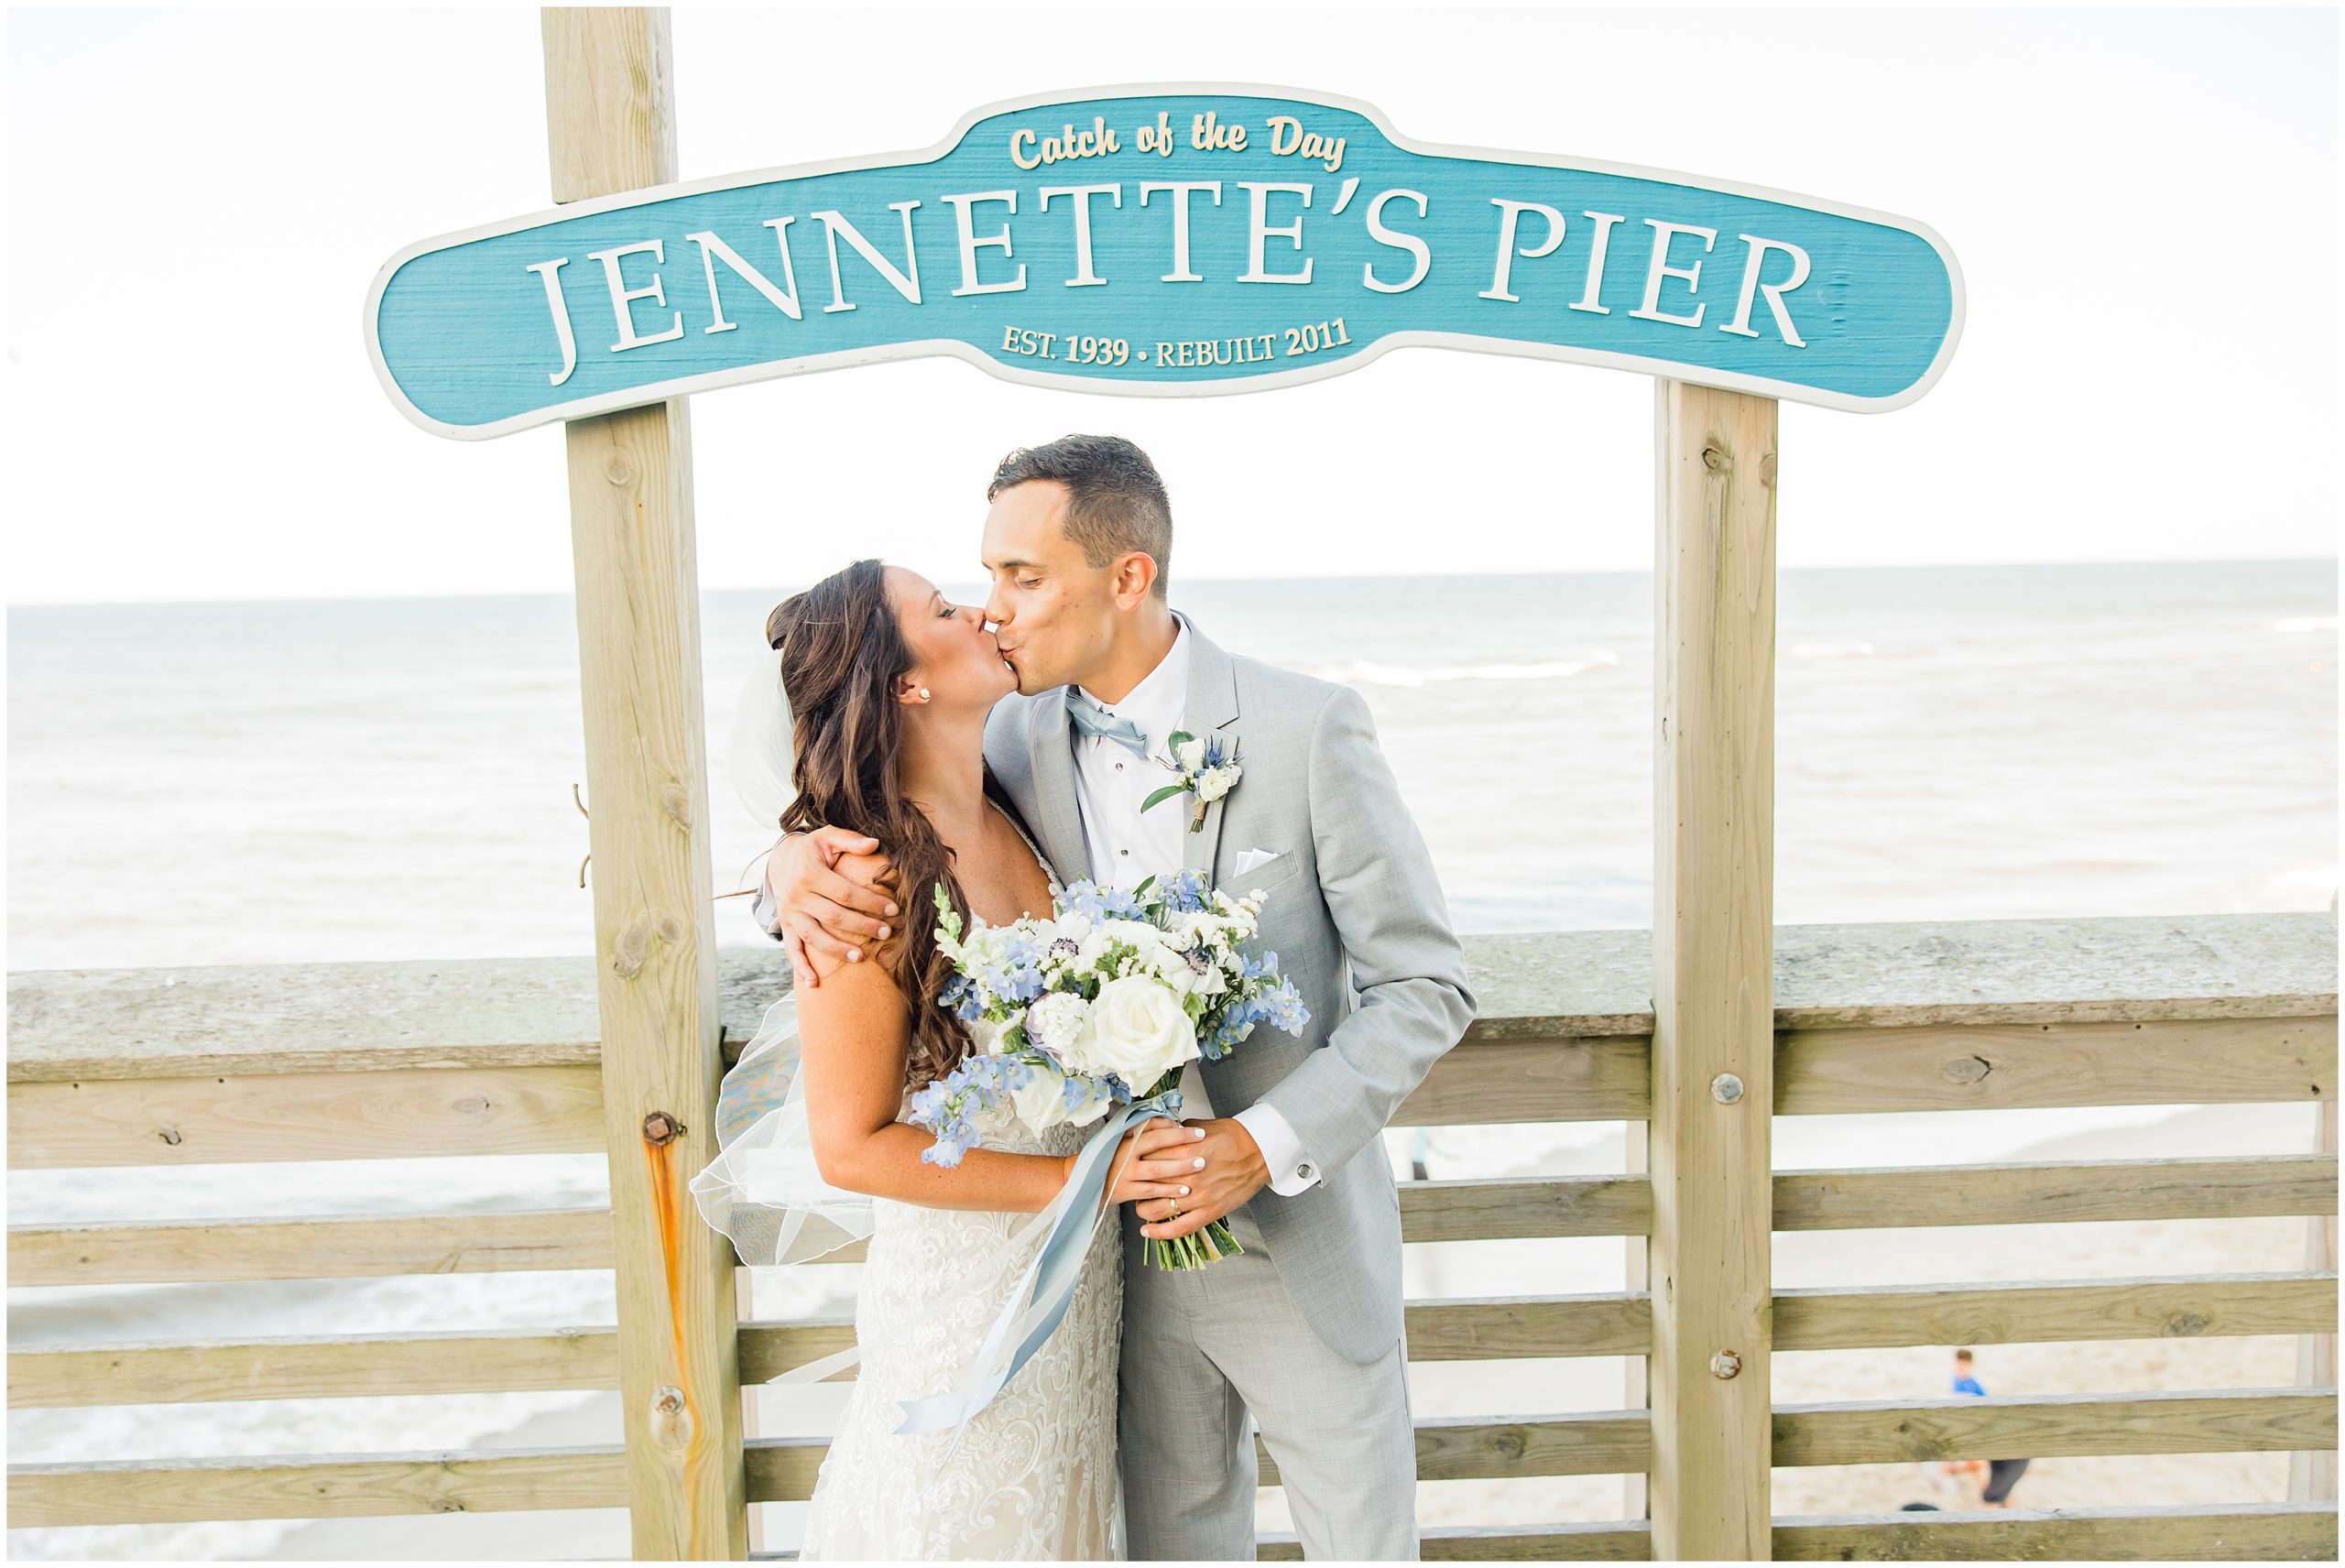 Jennette's Pier wedding day photographed by NC wedding photographer Morgan Amanda Photography